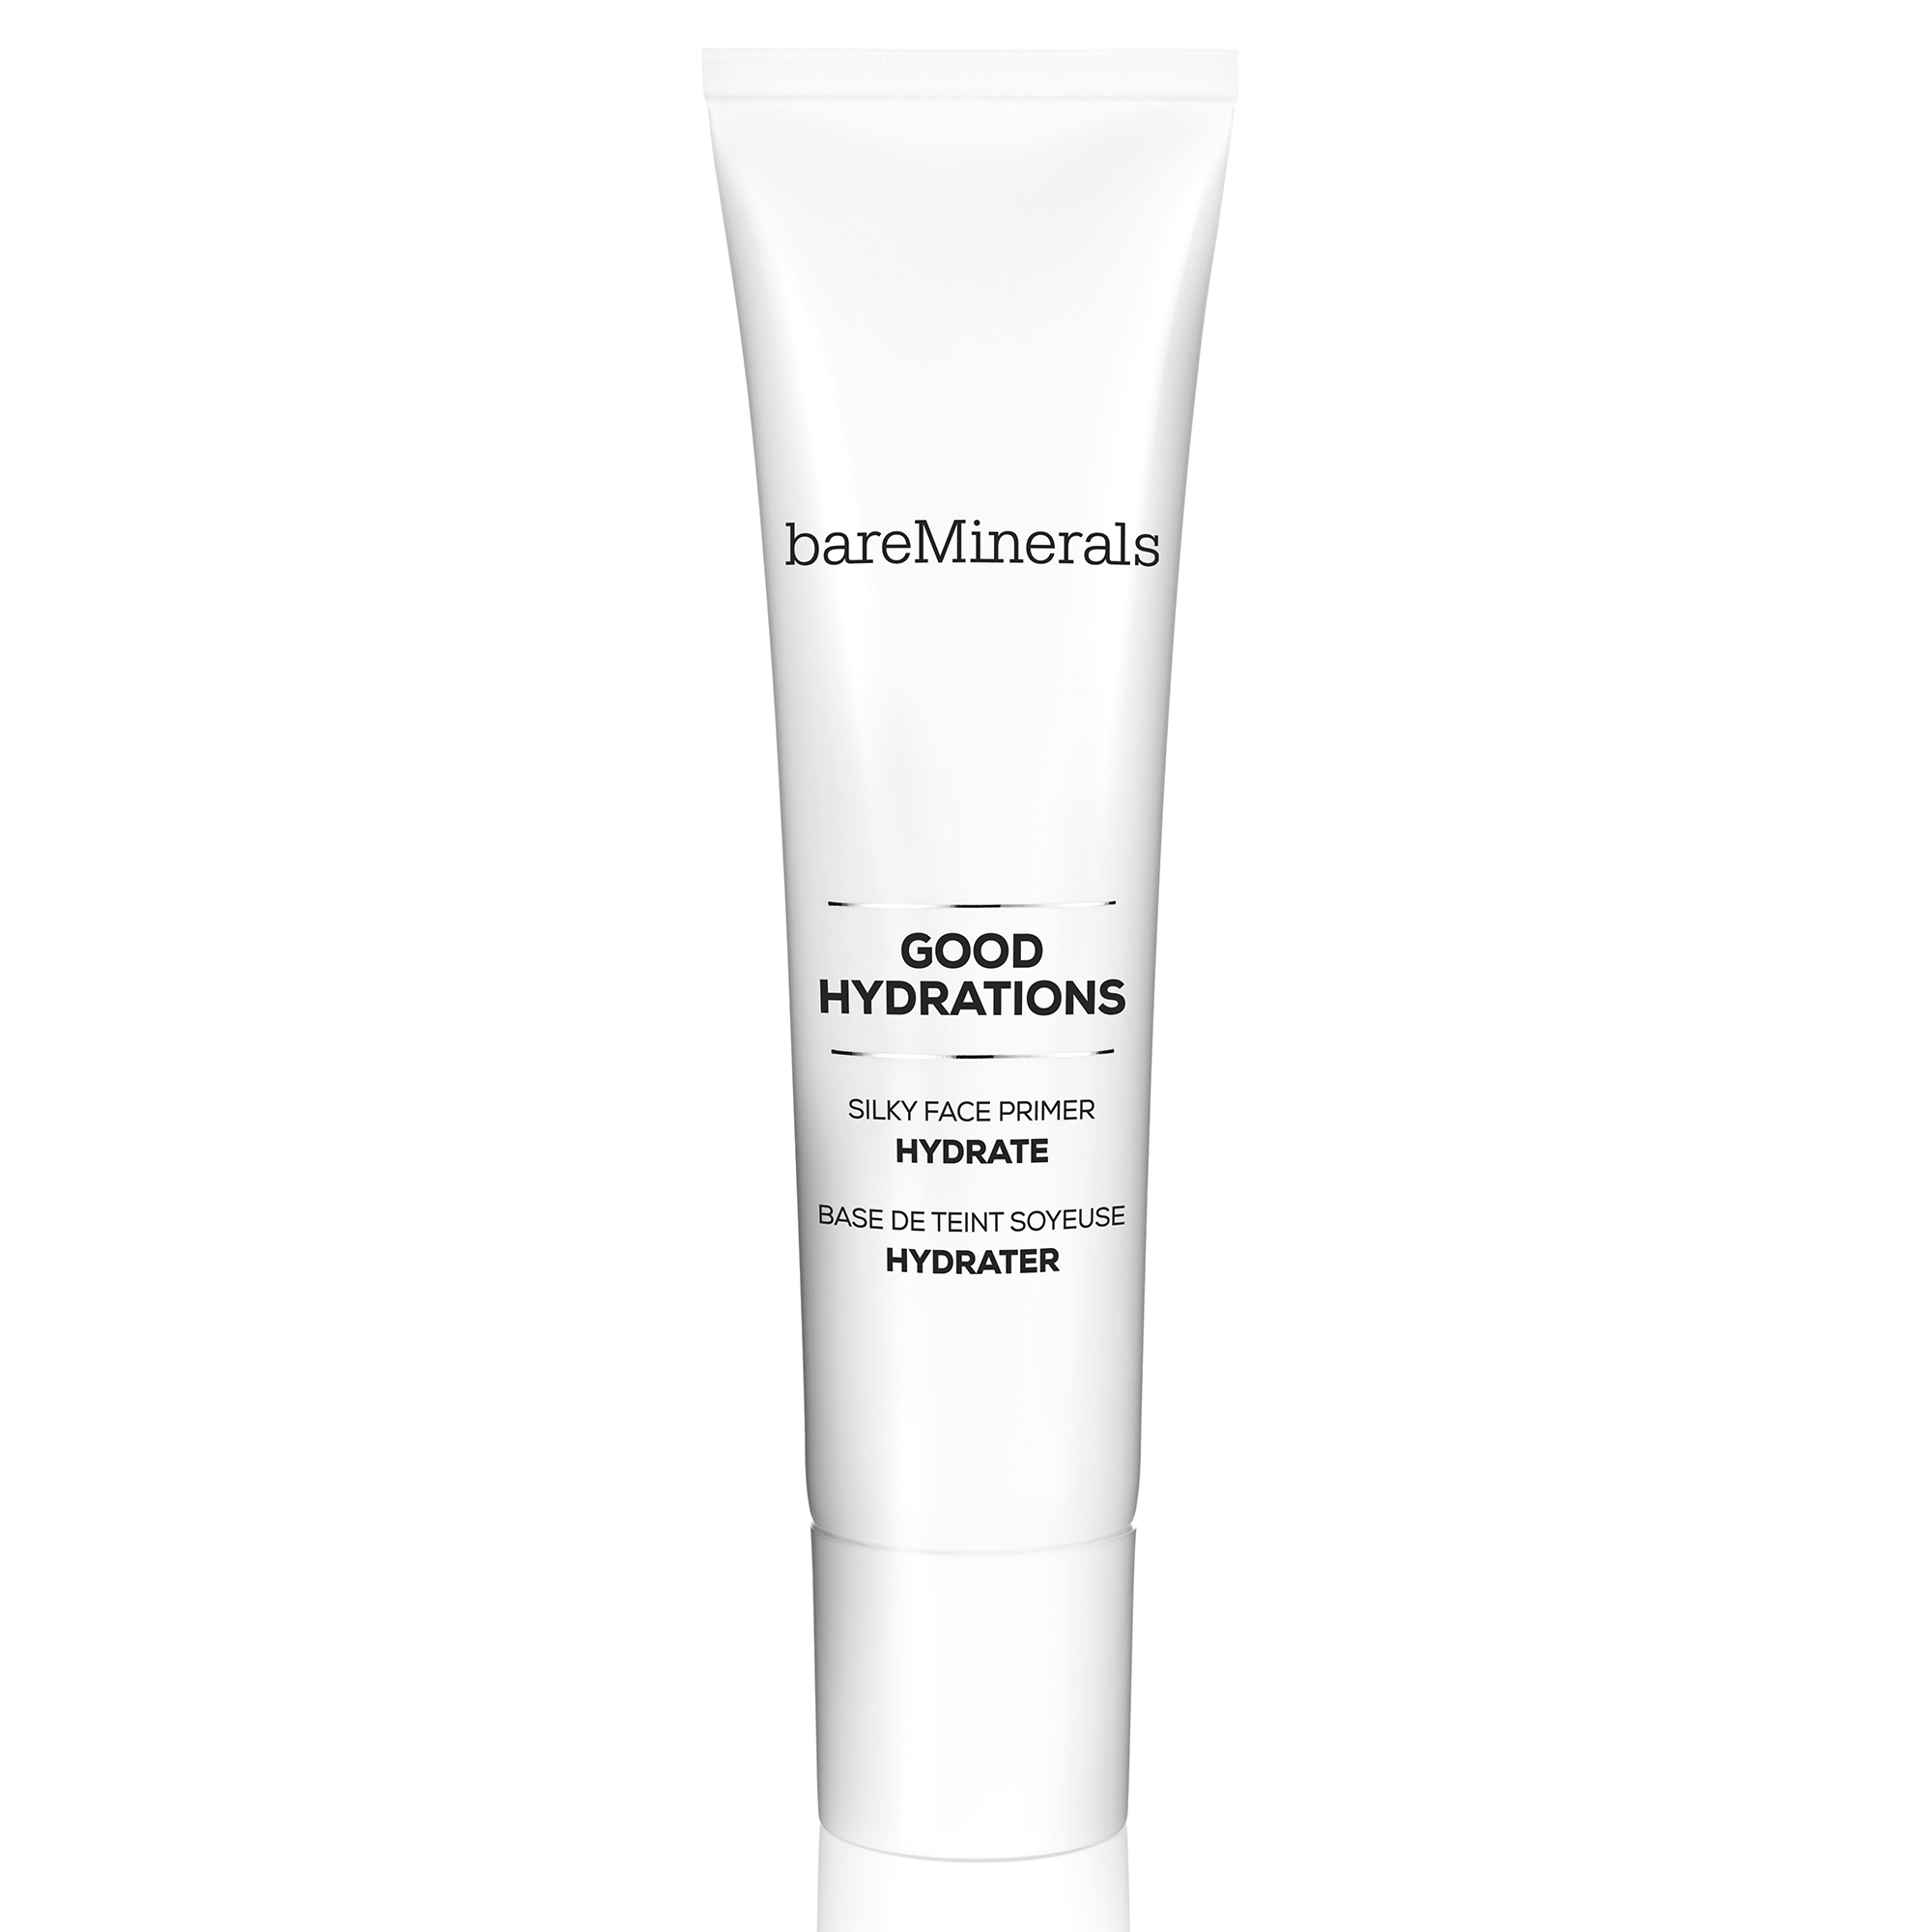  Good Hydrations Silky Face Primer